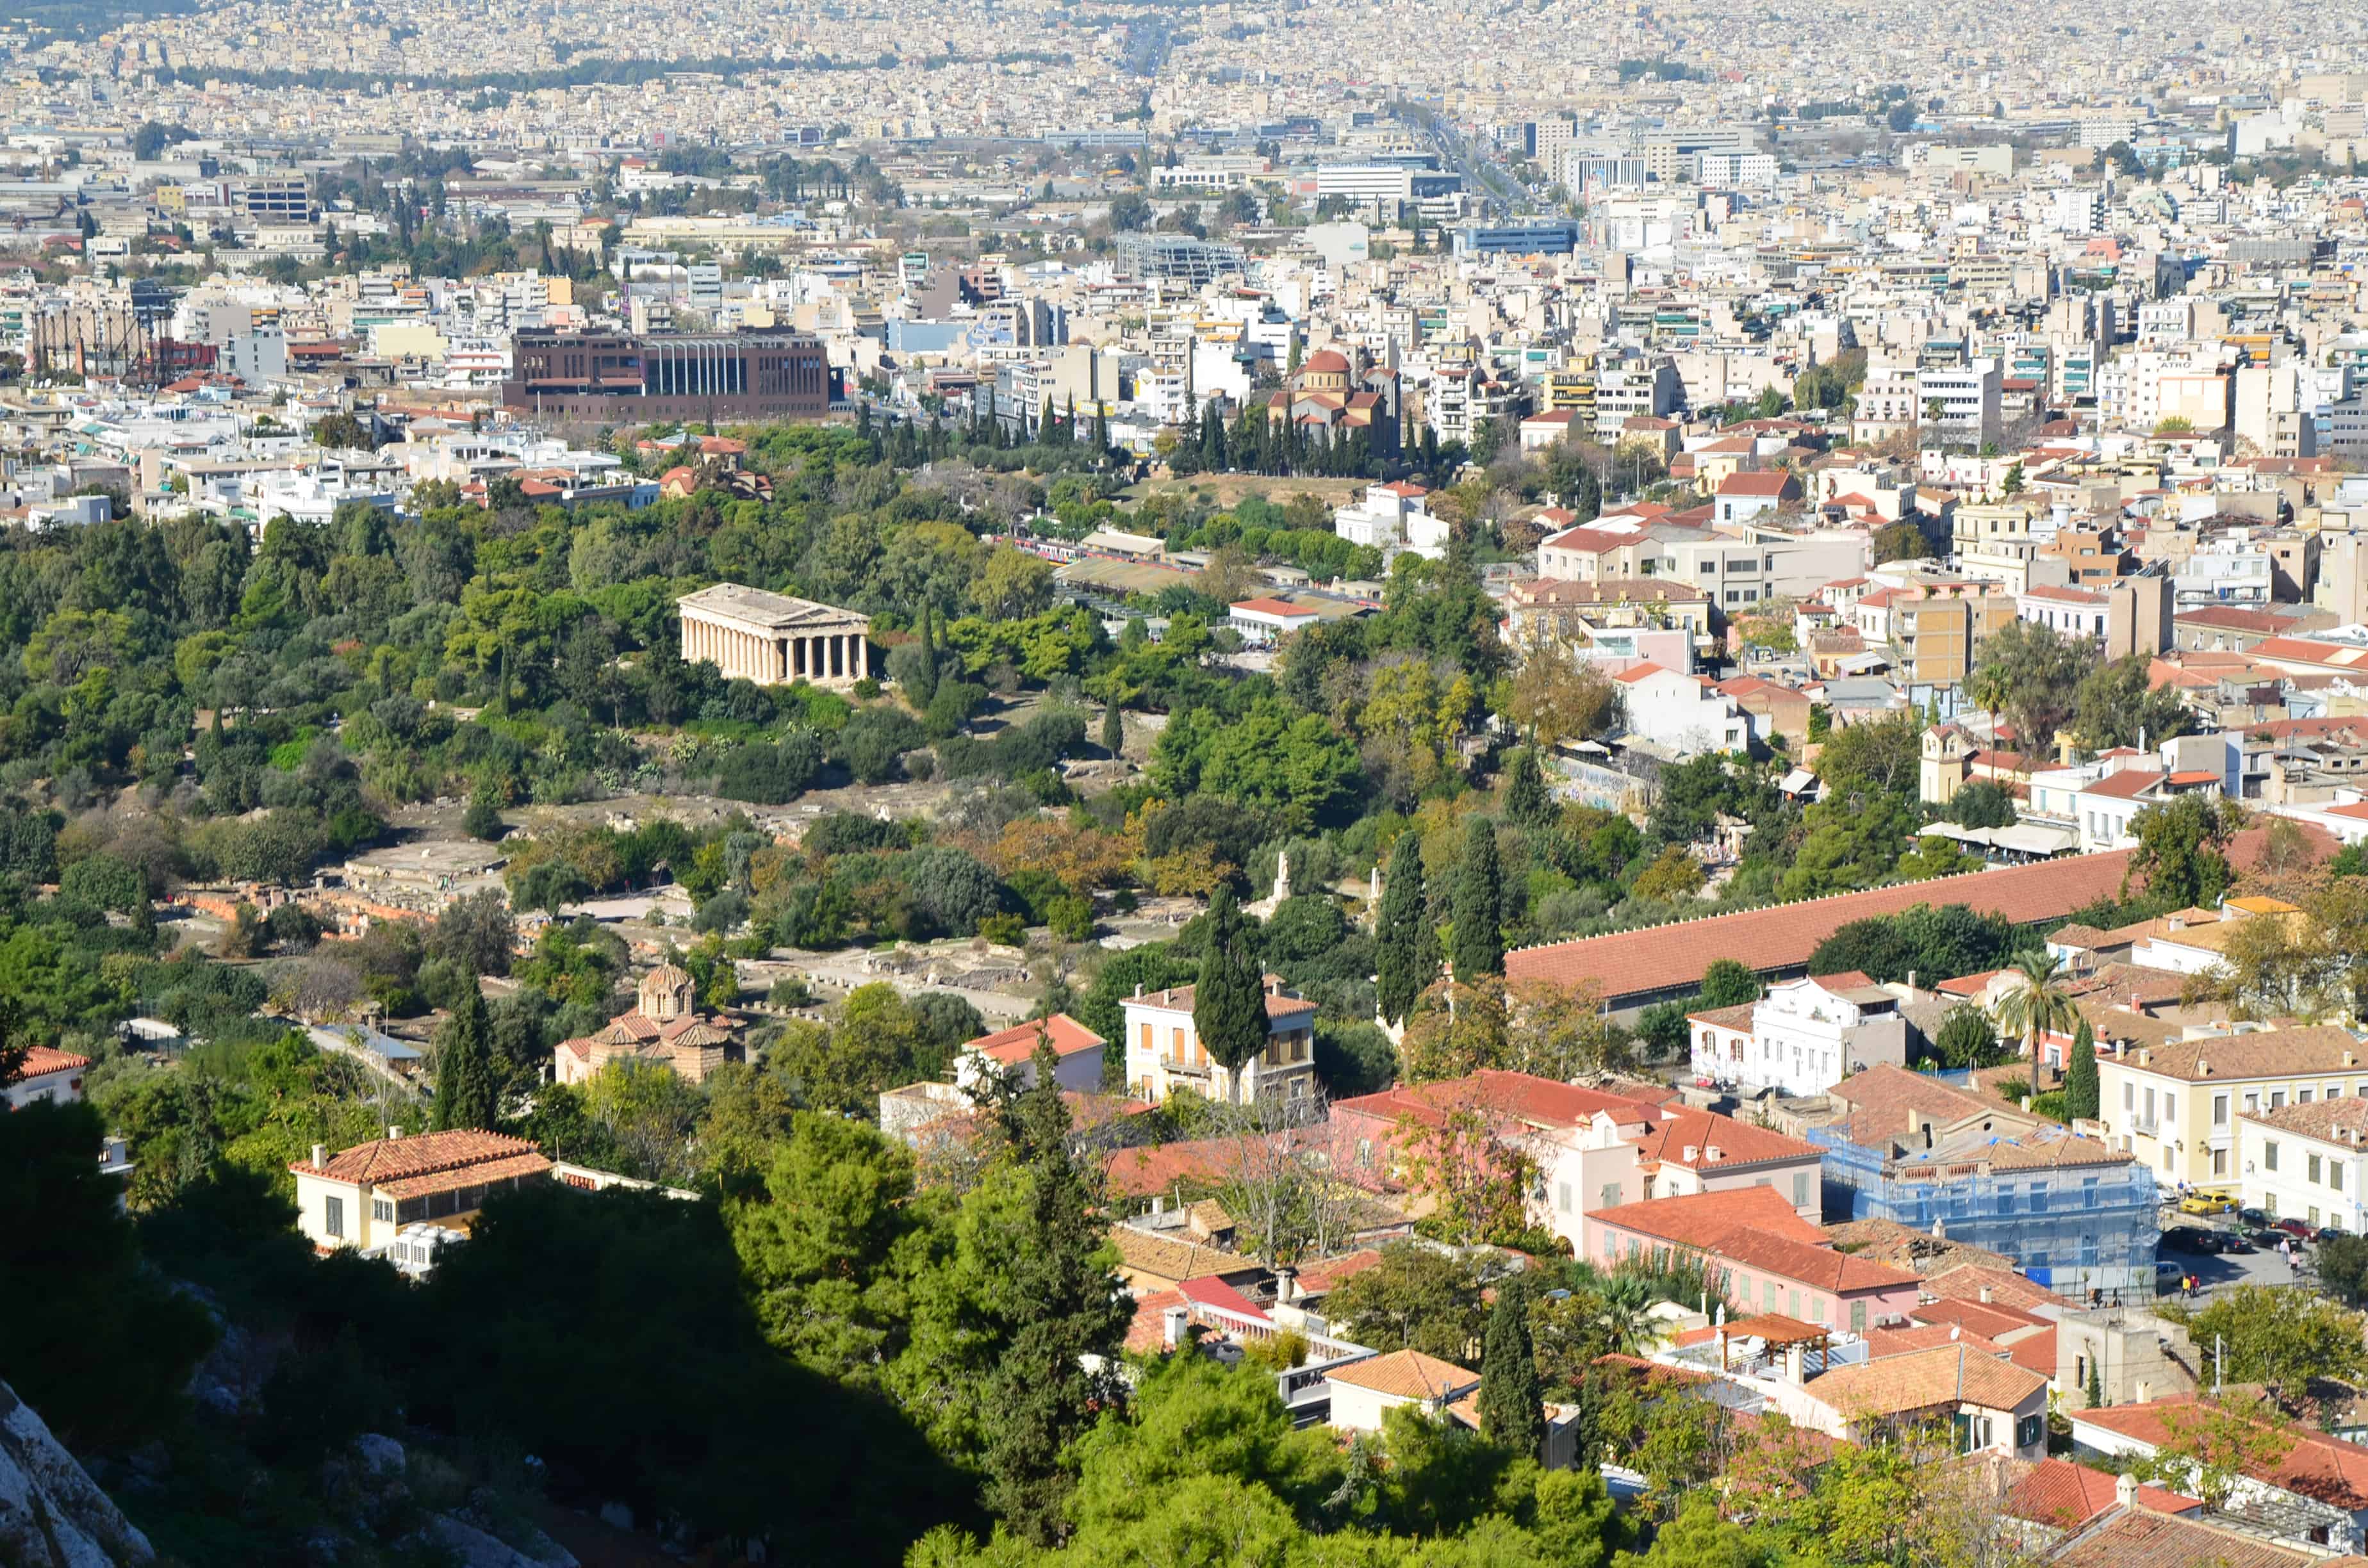 View of the Agora from the Acropolis, Athens, Greece